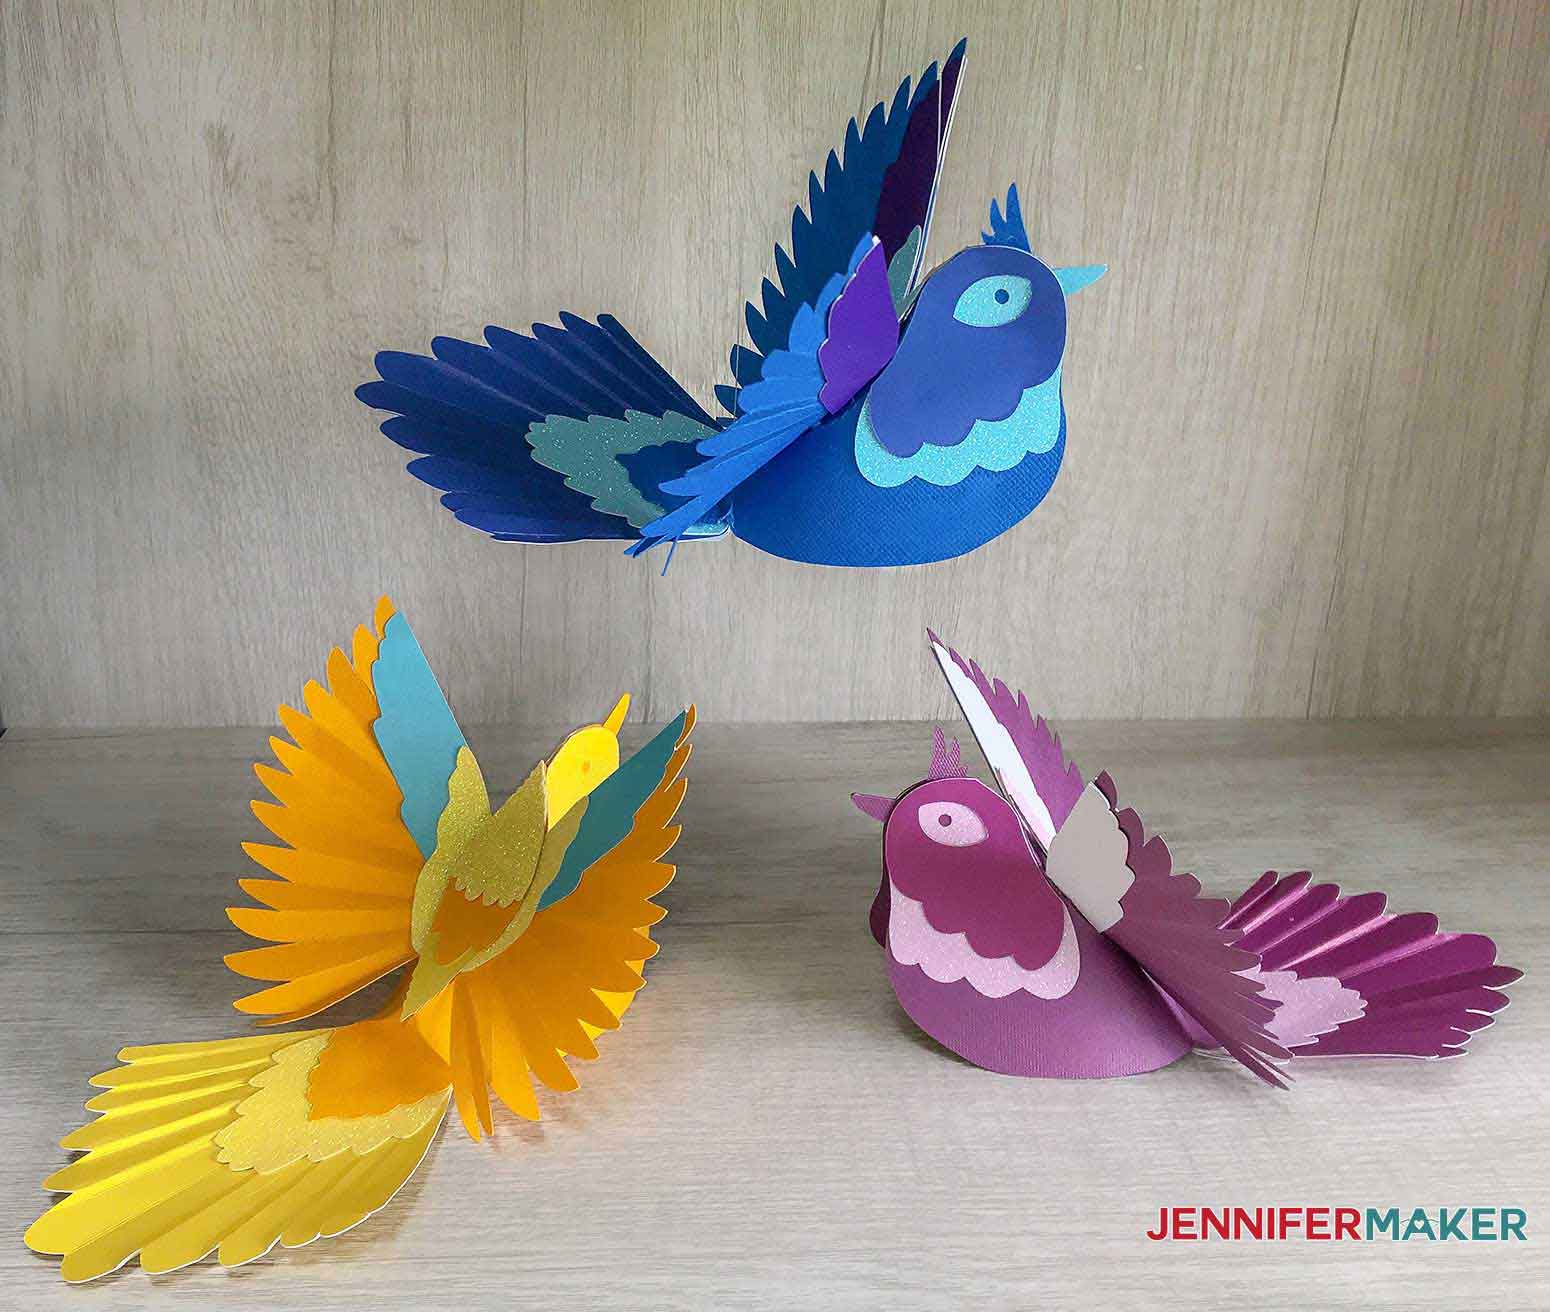 How To Make Origami Birds Step By Step